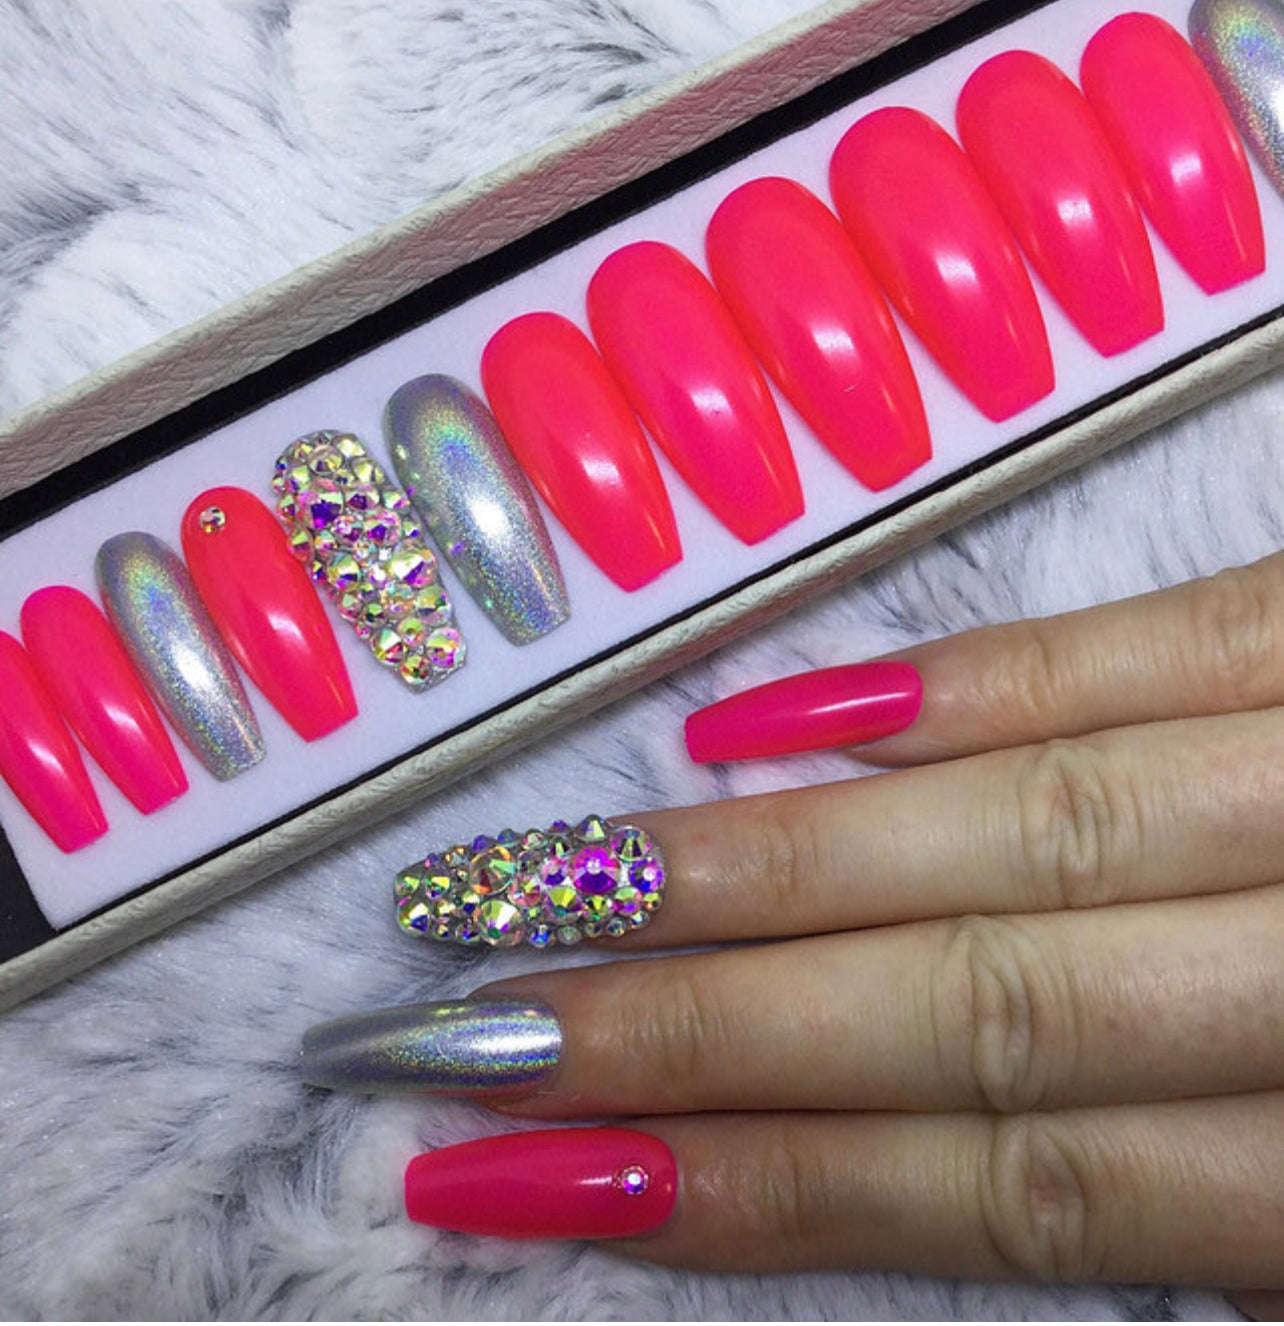 Z BEAUTI - Pink and Silver with Bling Coffin Nails-Medium